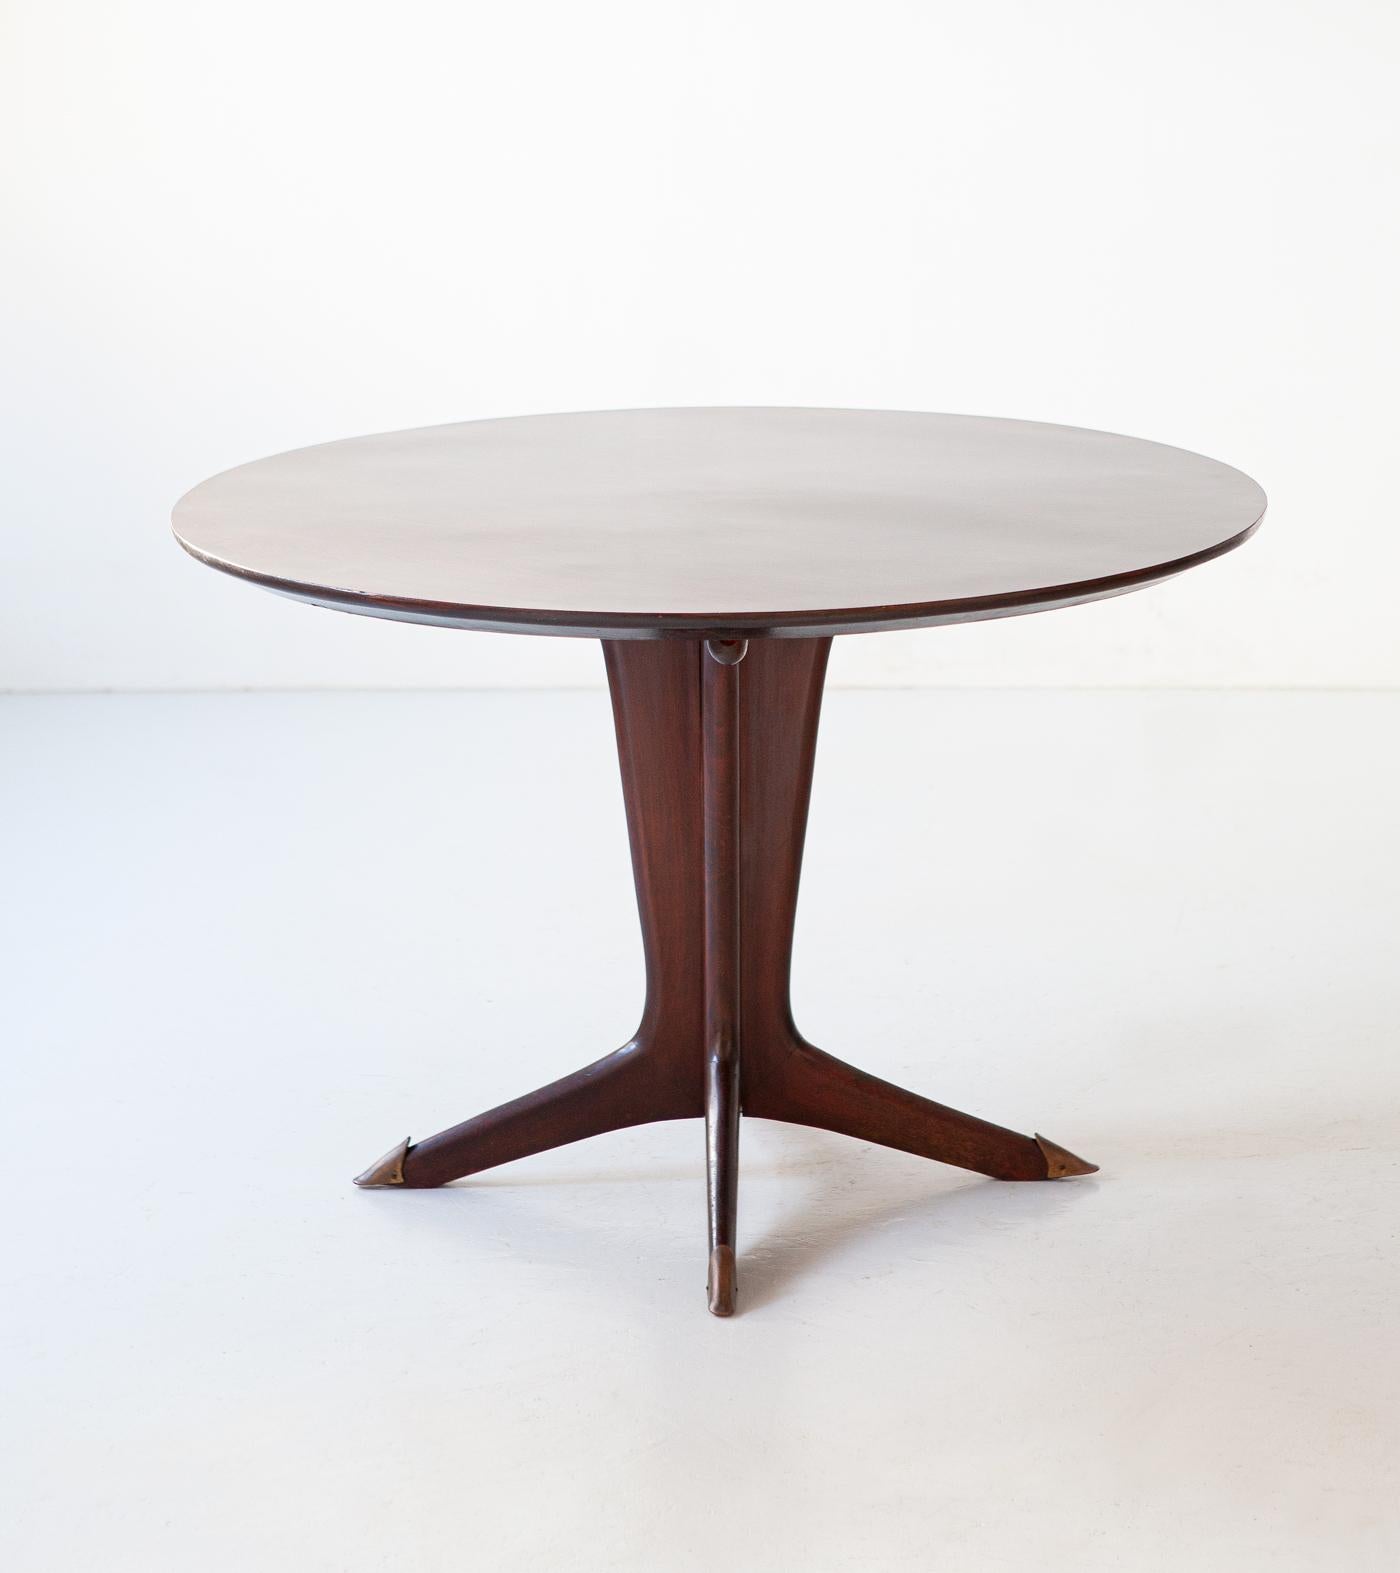 Faux Leather Italian Round Wooden Dining Table with 4 Chairs Set by Carlo Ratti